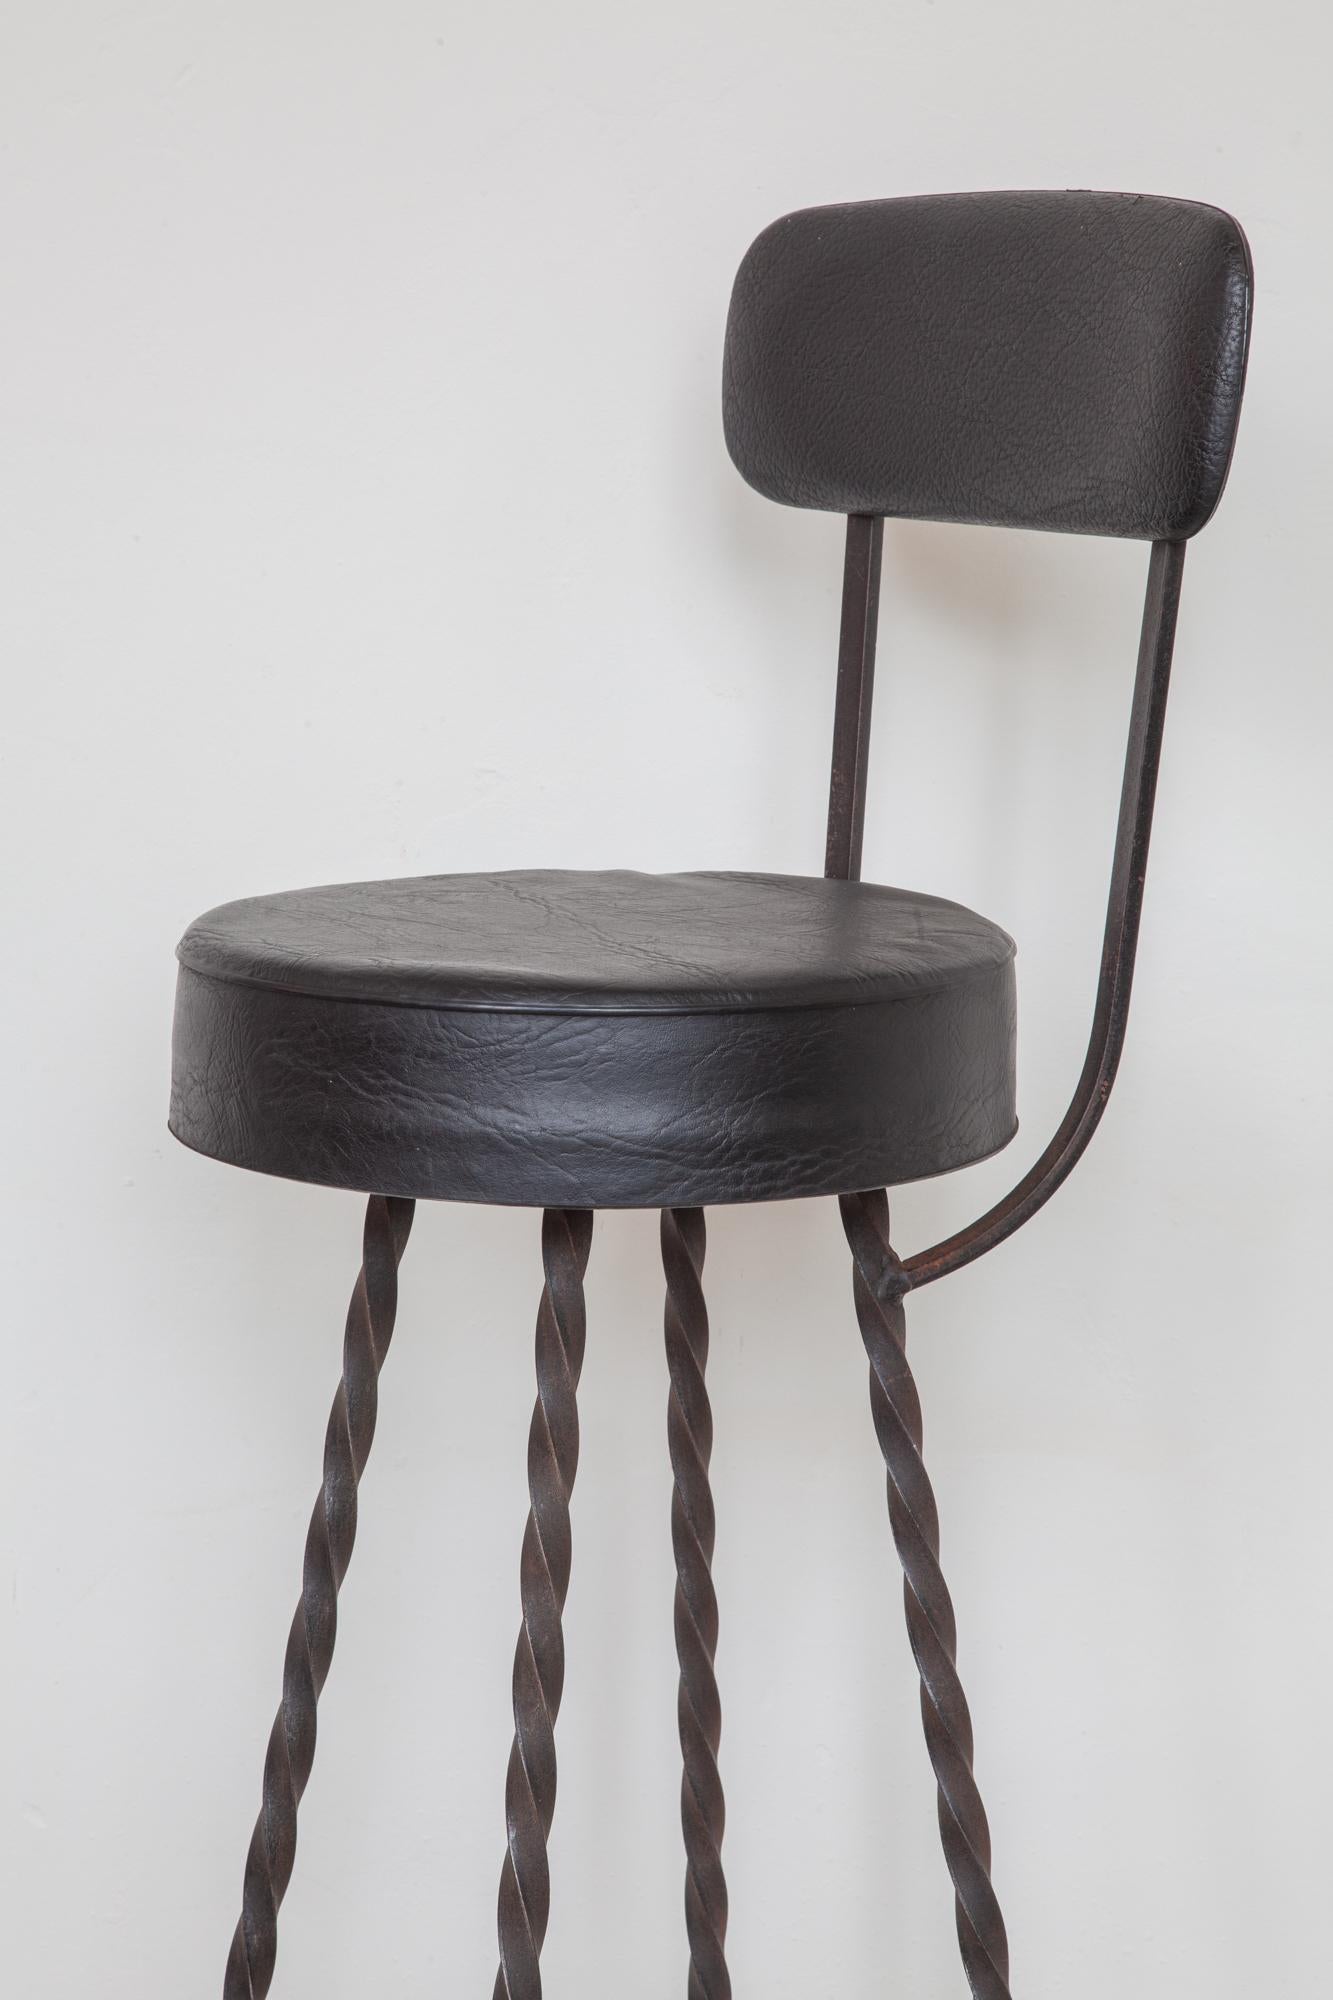 Brutalist set of four cast iron vintage bar stools made in the 1970s with feet ring and backseat.
Diameter: 31 cm, Height: 85 cm, all in perfect original condition.